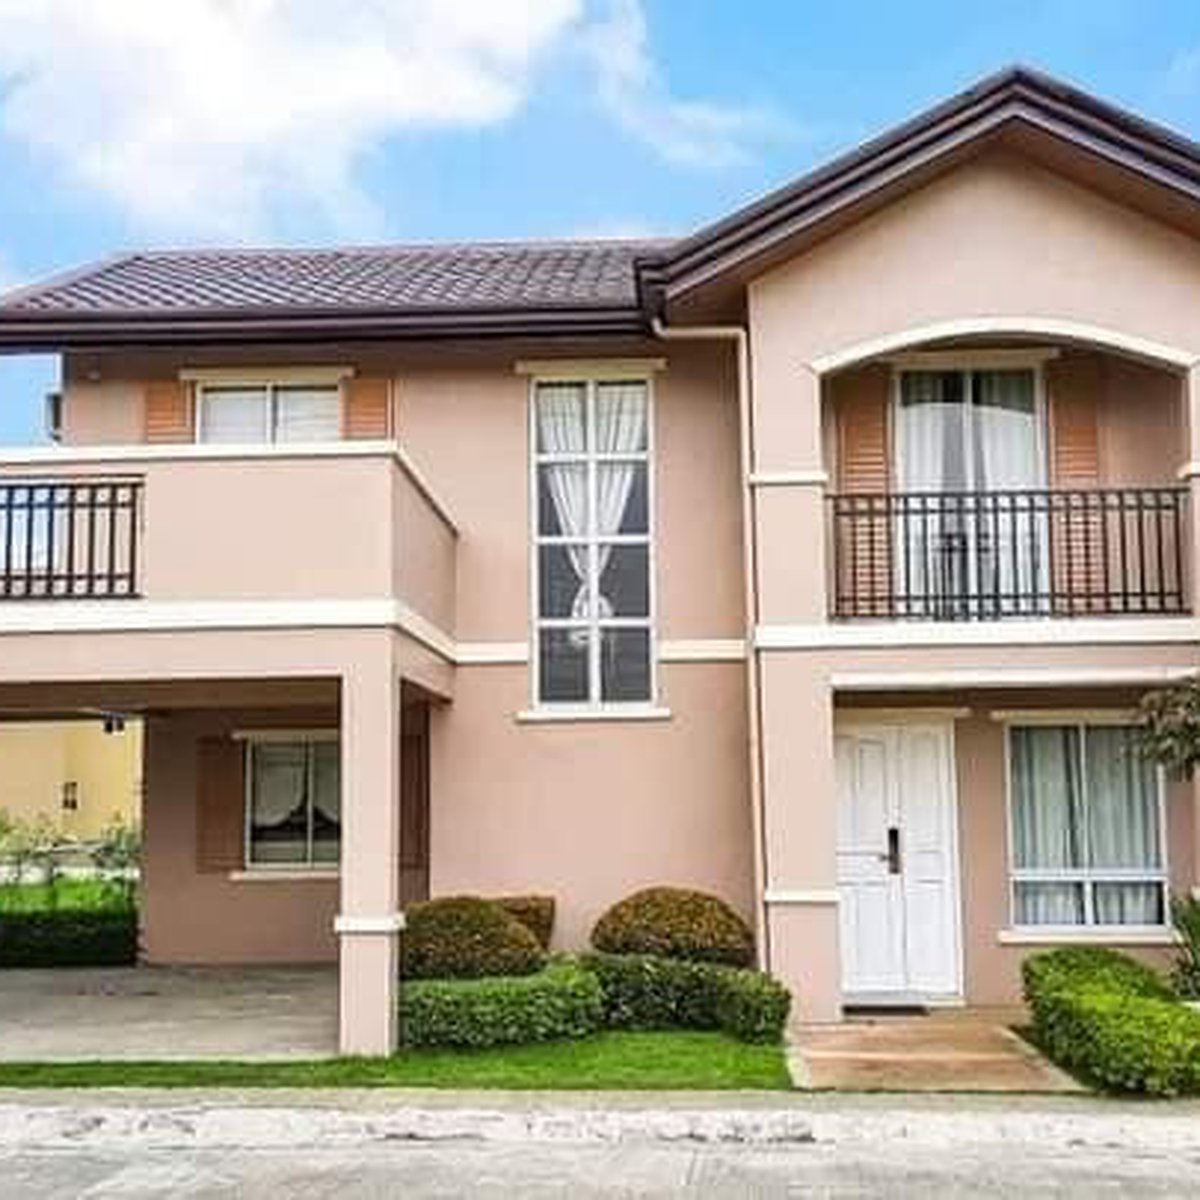 5-bedroom Single Attached House For Sale in Gapan Nueva Ecija